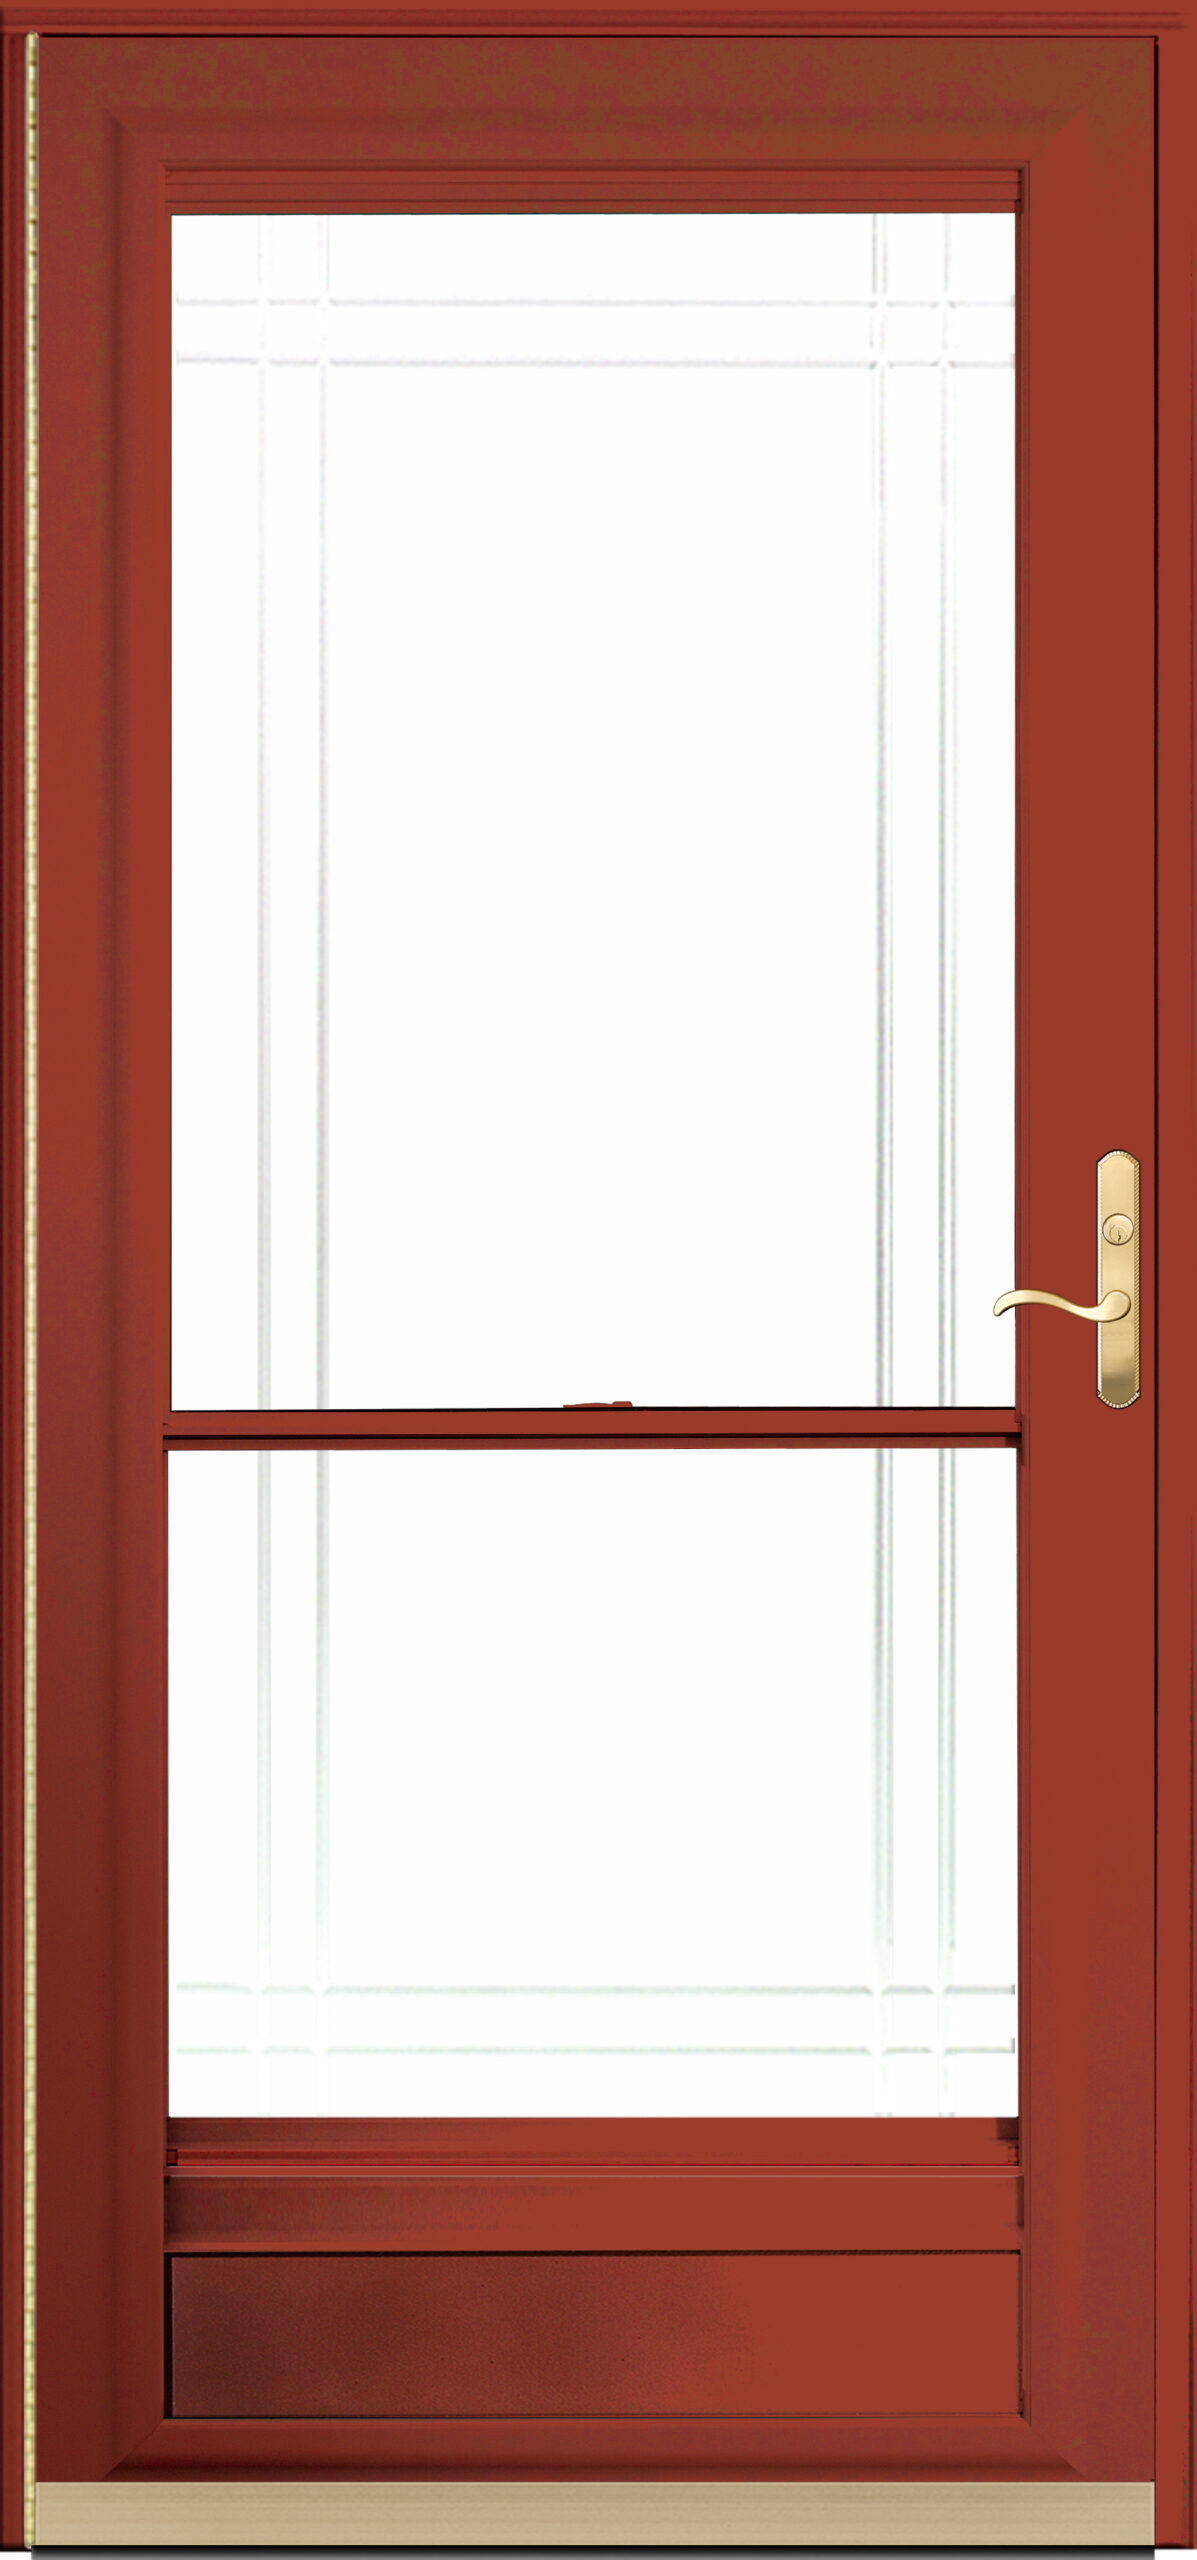 Isolated image of one of ProVia's Spectrum storm doors and retractable screen doors in red